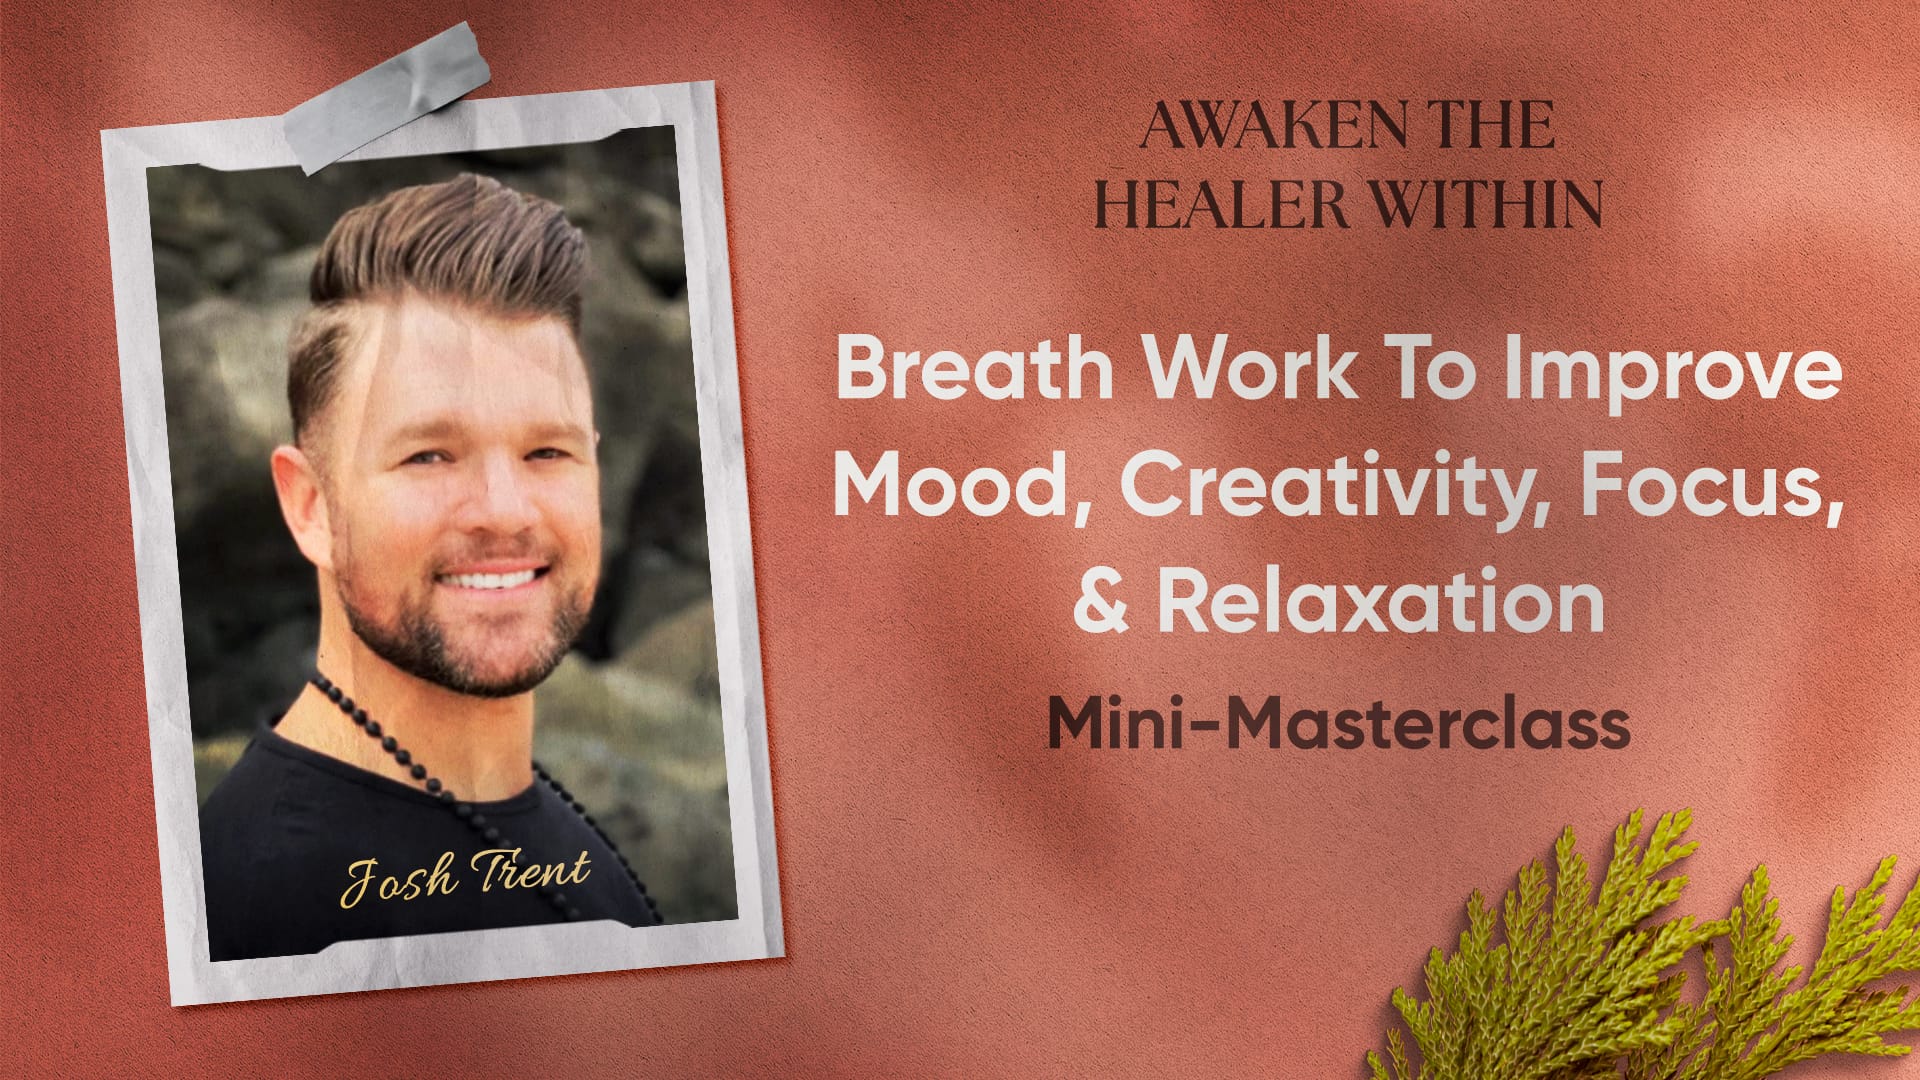 Breath Work To Improve Mood, Creativity, Focus, & Relaxation